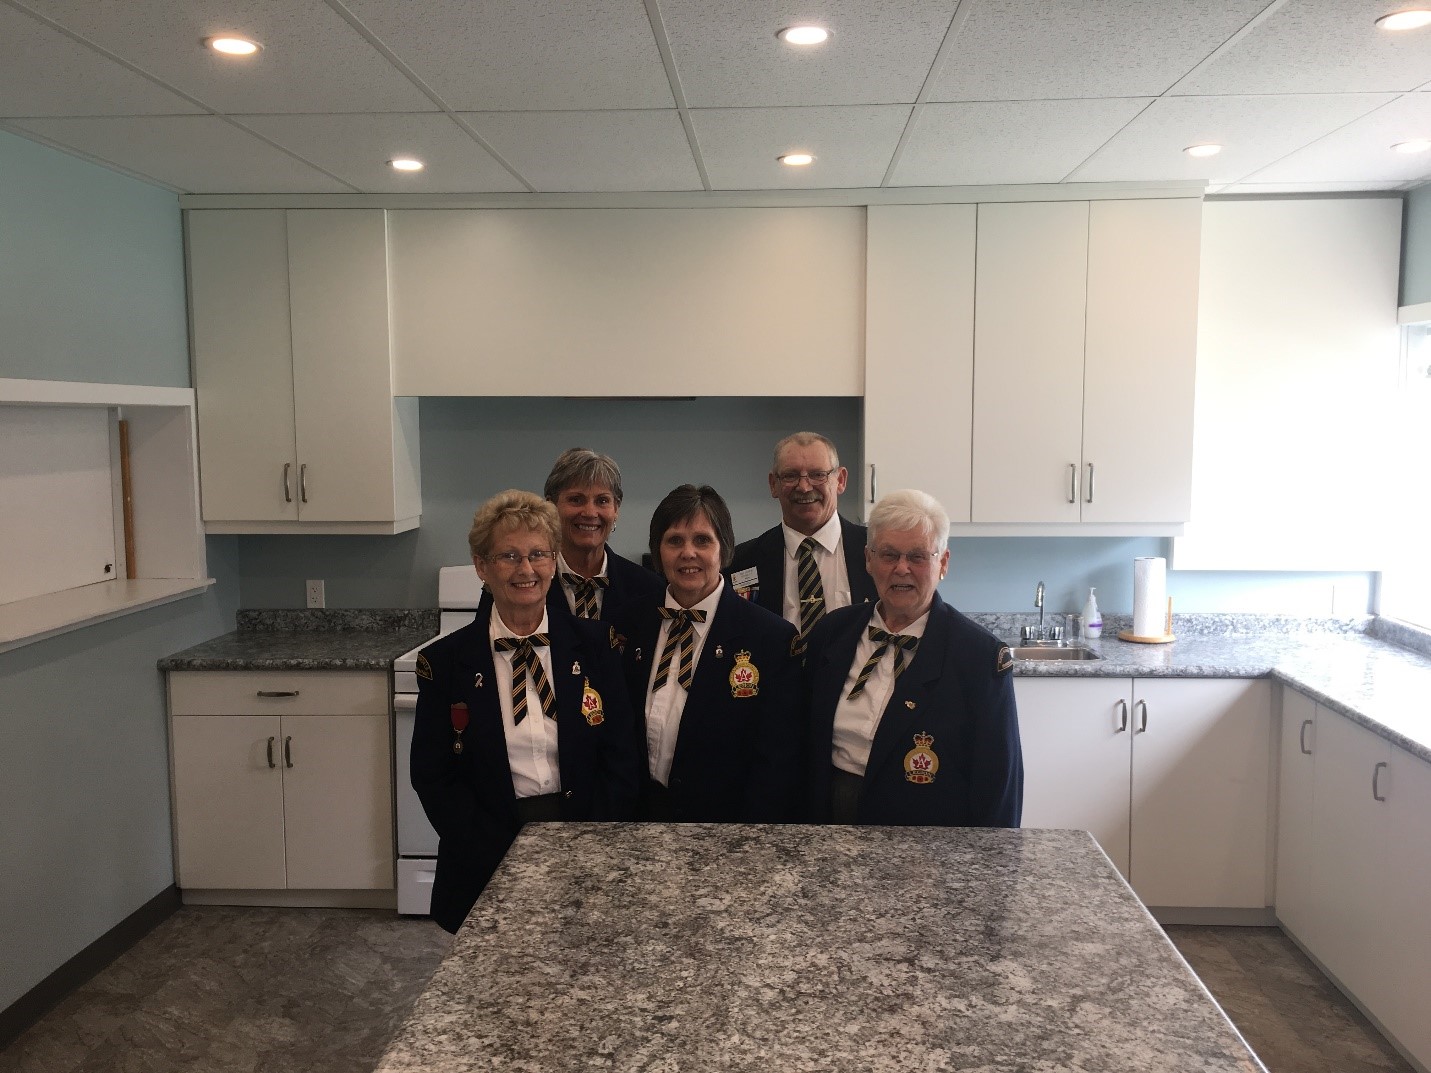 Members of the Ripley Royal Canadian Legion and the Ladies Auxiliary of Branch 440 are very proud of their new kitchen.